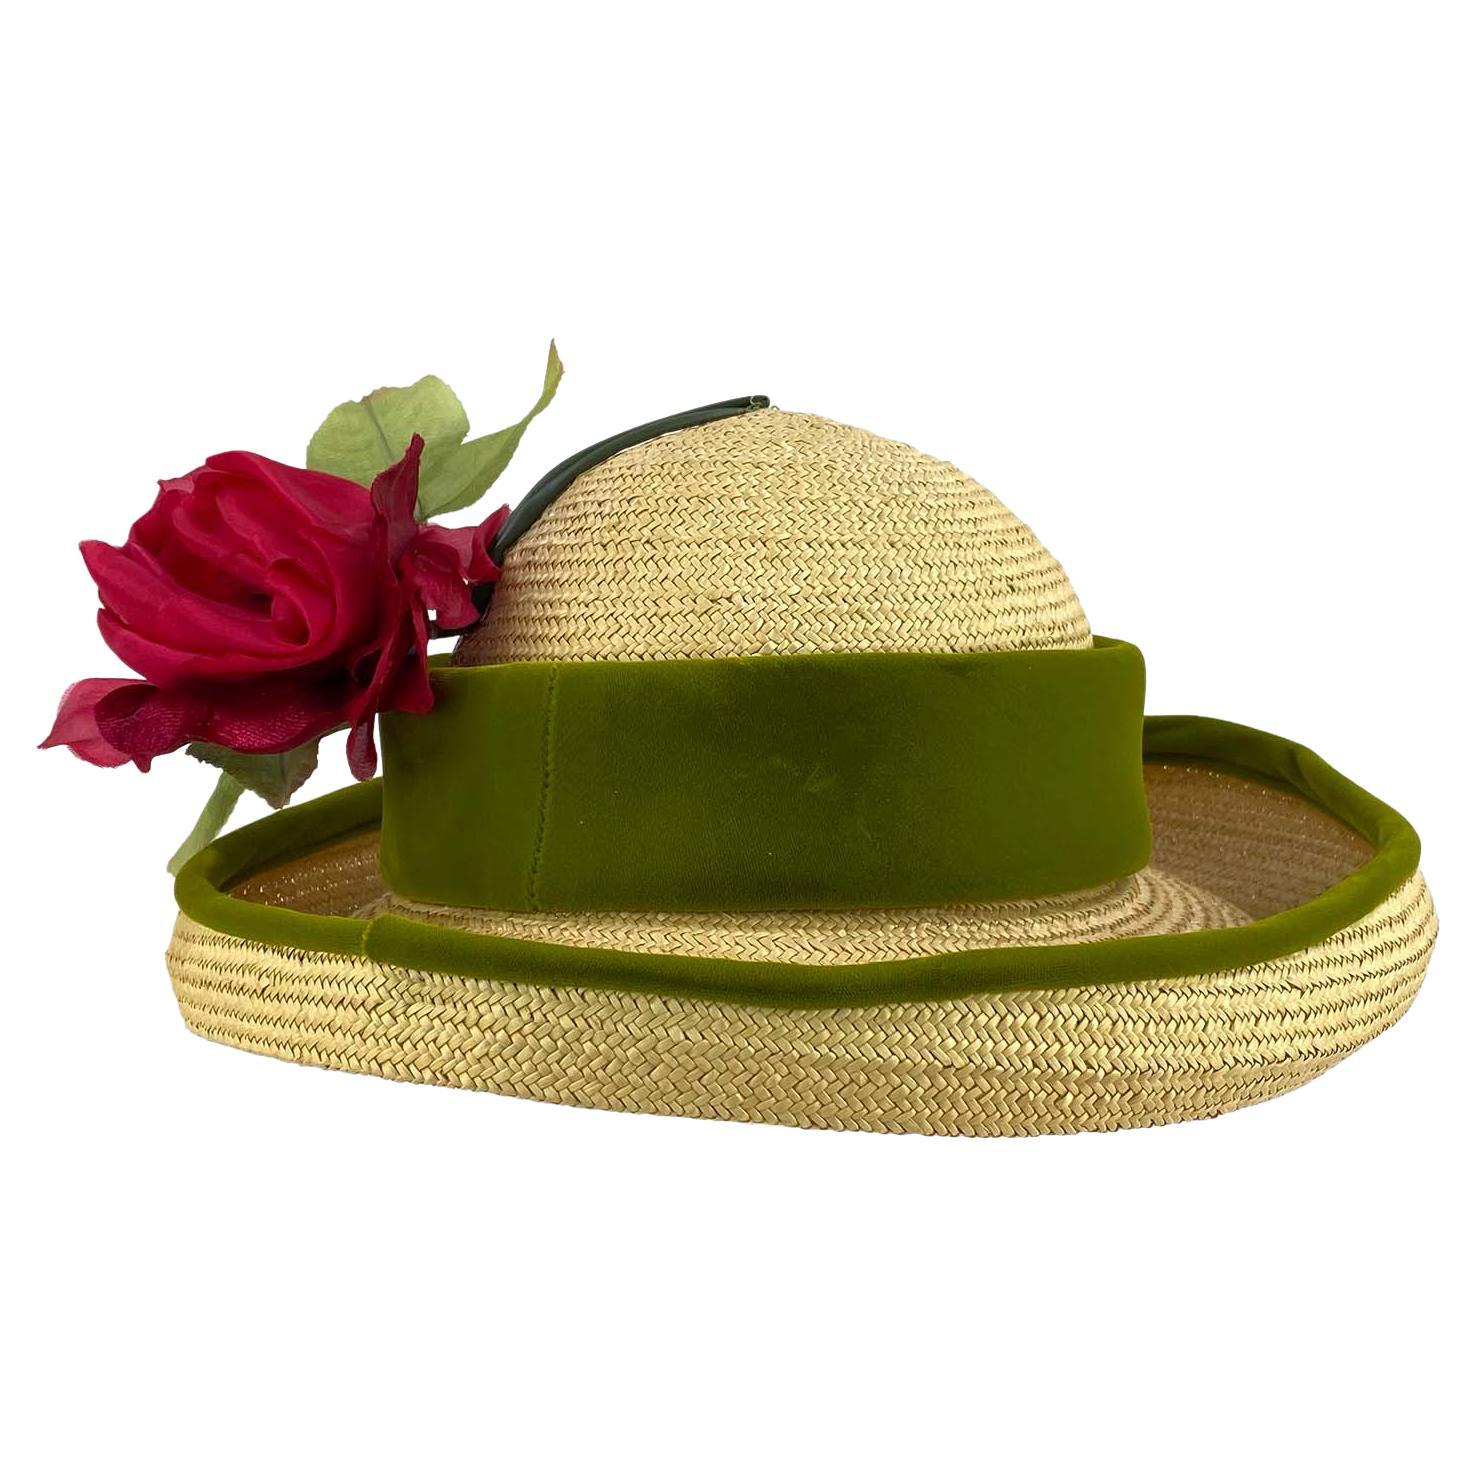 1960s Christian Dior Chapeaux by Marc Bohan Woven Wicker Floral Rose Velvet Hat For Sale